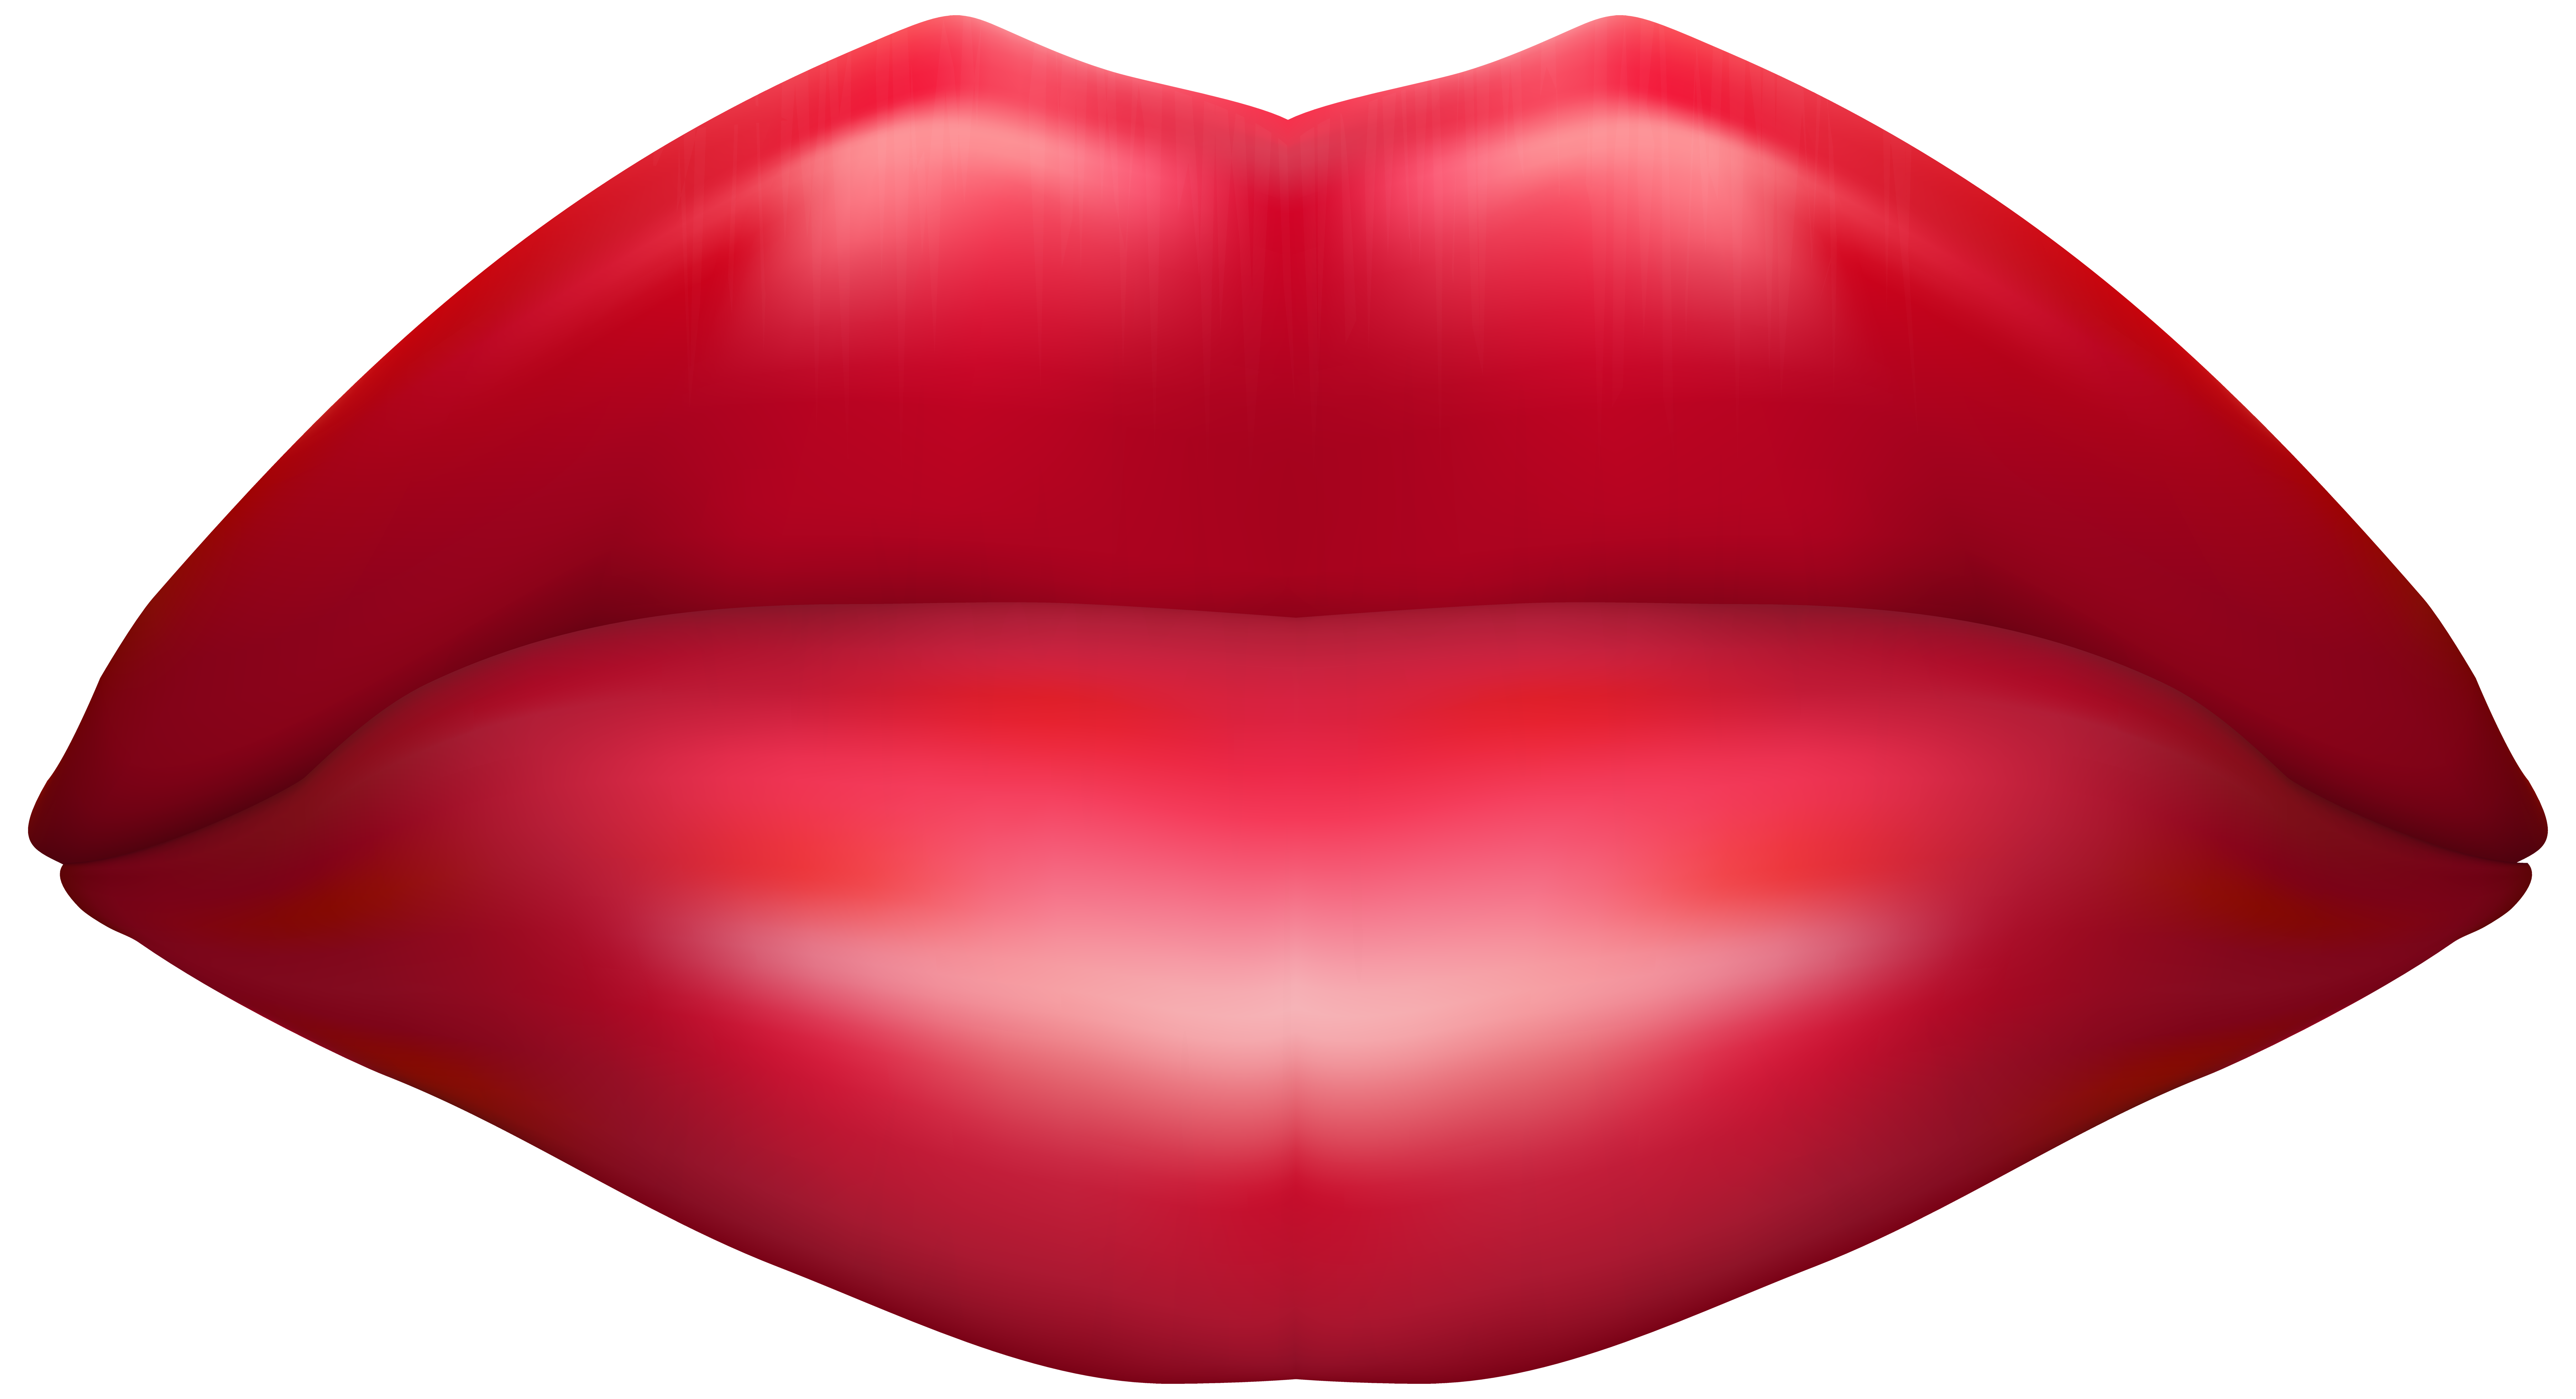 mouth clipart clean mouth